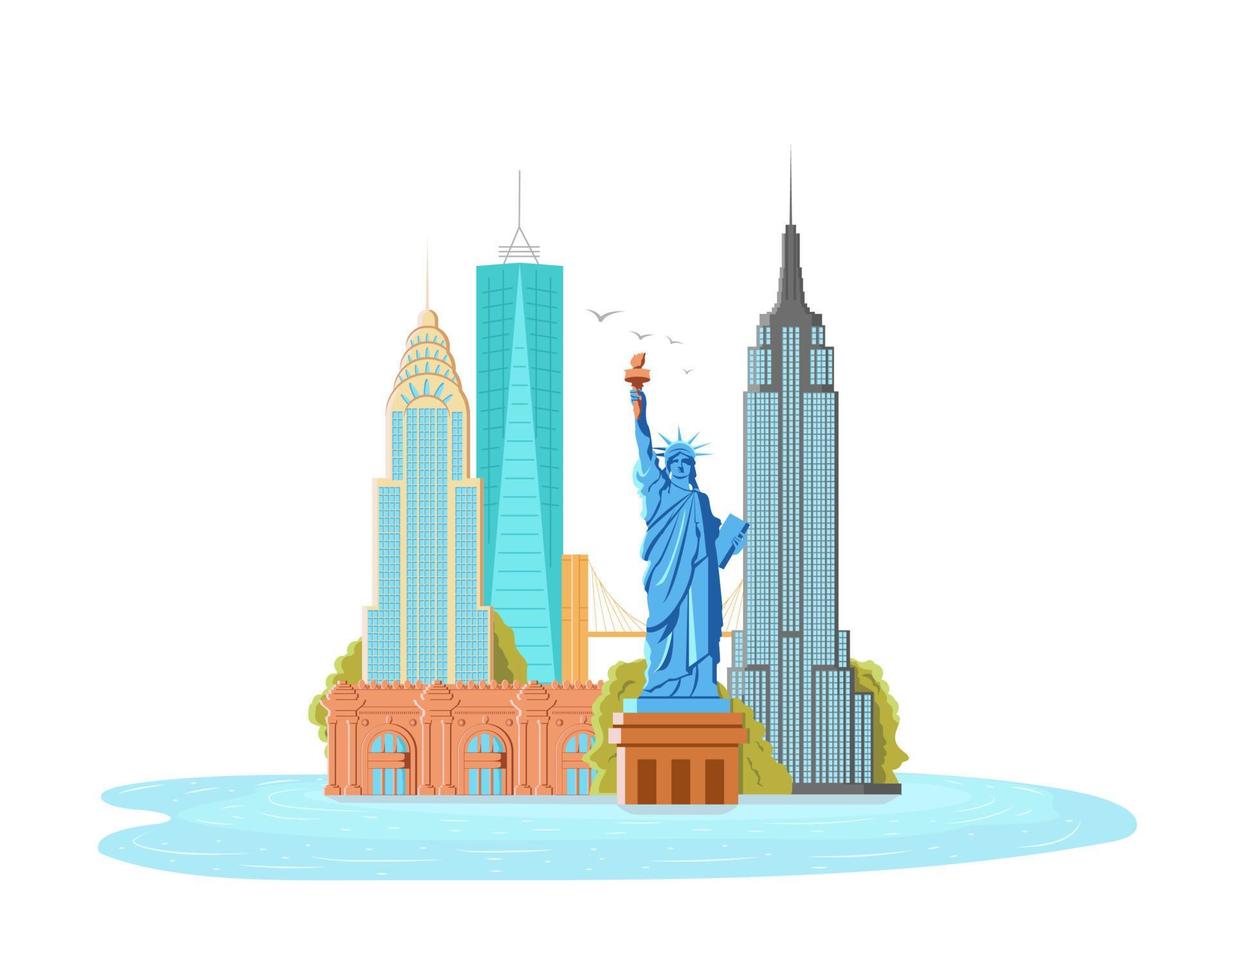 Illustration of New York City, vector landscape of buildings and the Statue of Liberty